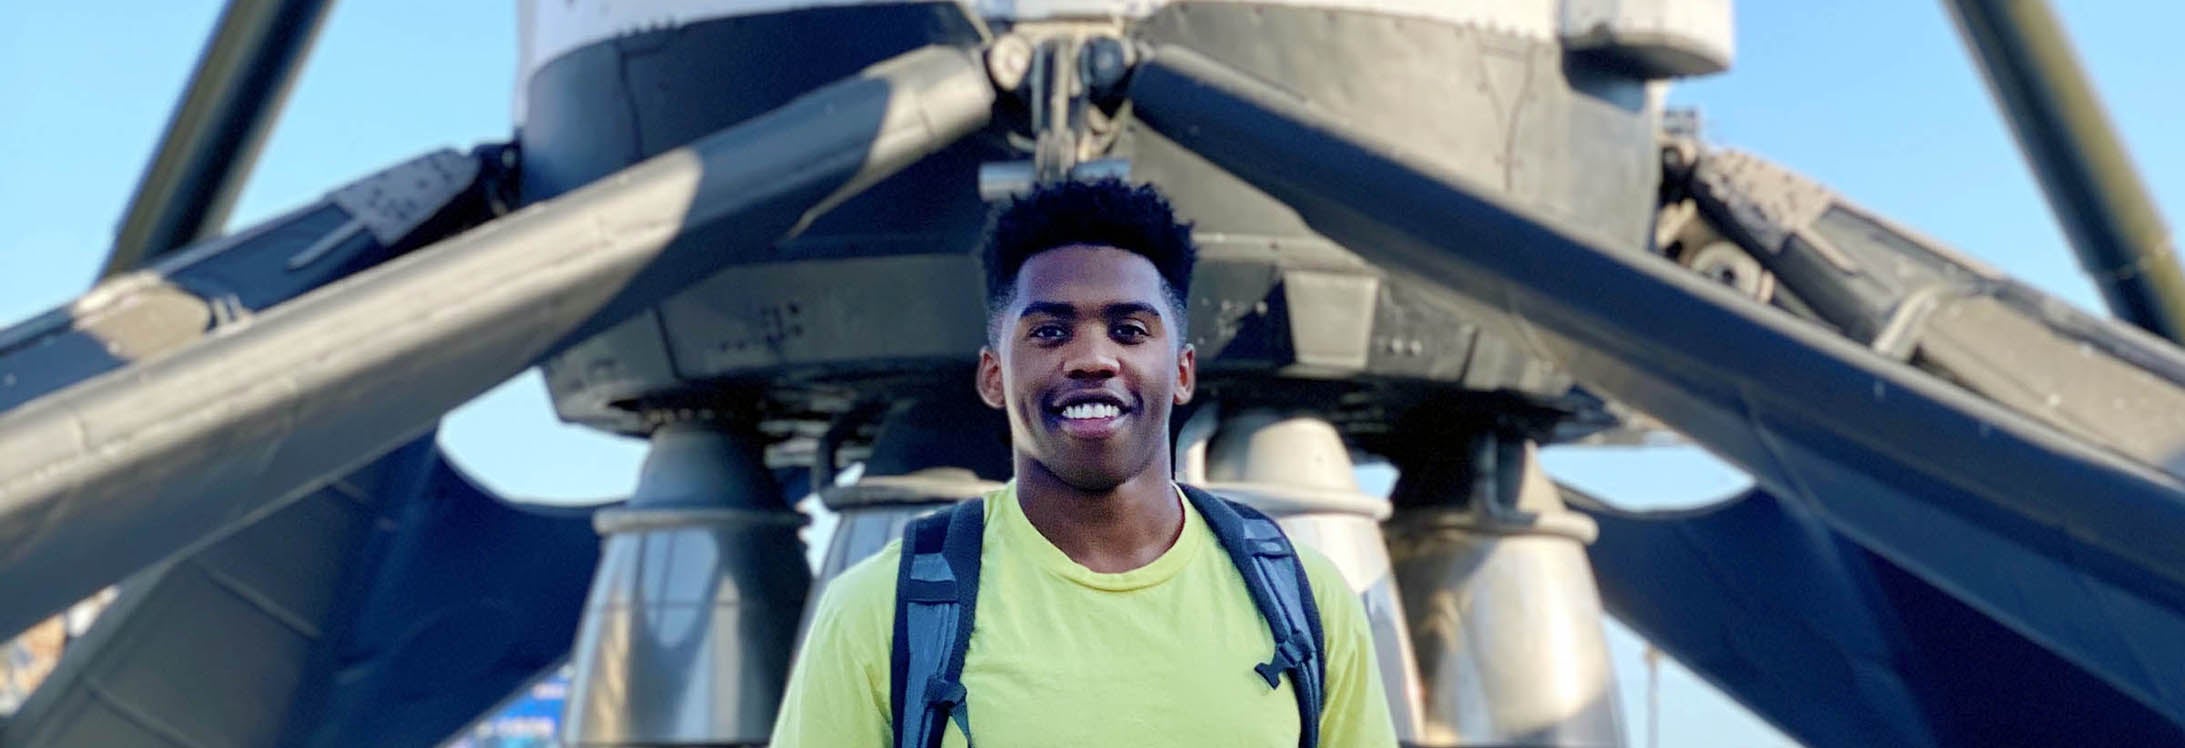 ECU student Eddie Okeiga spent his summer in California as an intern at SpaceX. (Contributed photo)